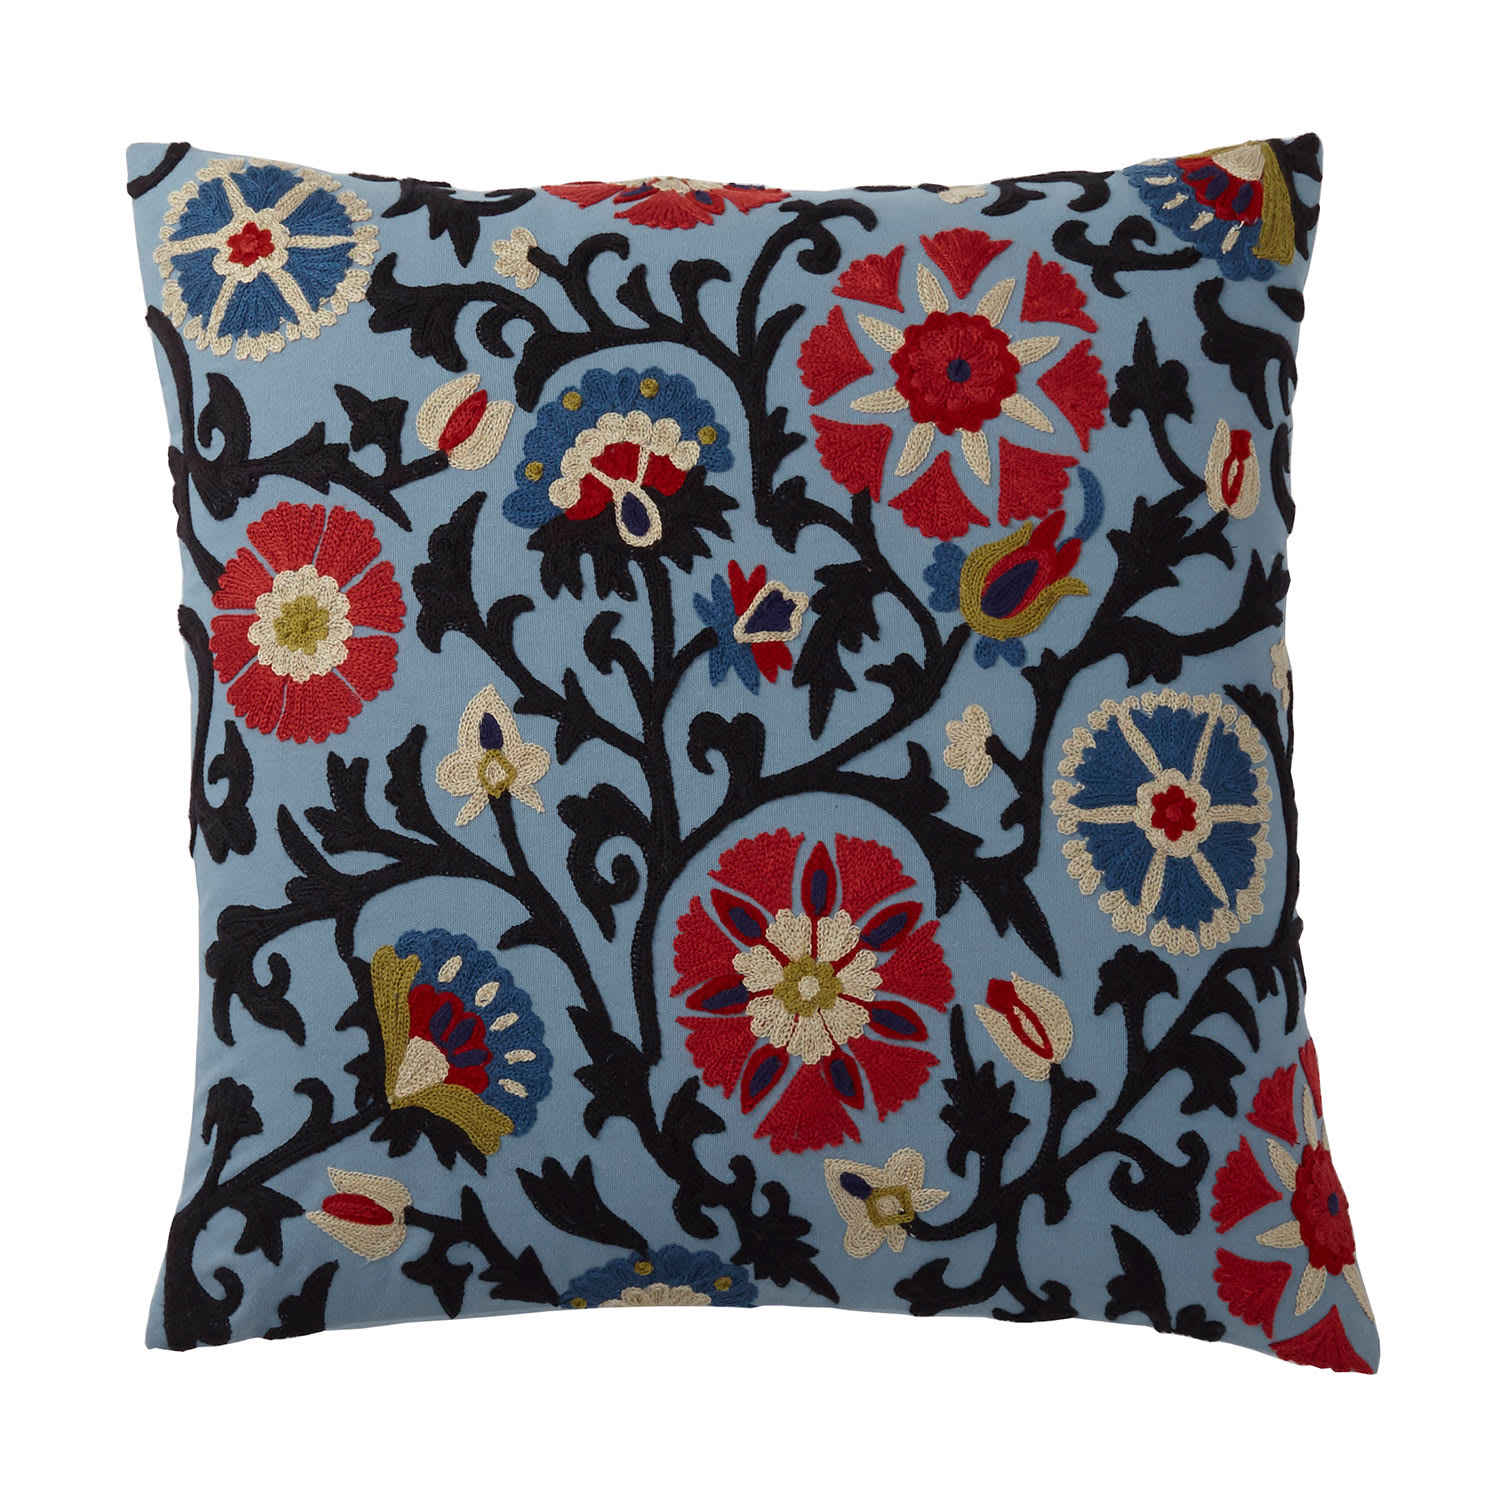 Multicolored Floral Embroidered Pillow Cover - Floral